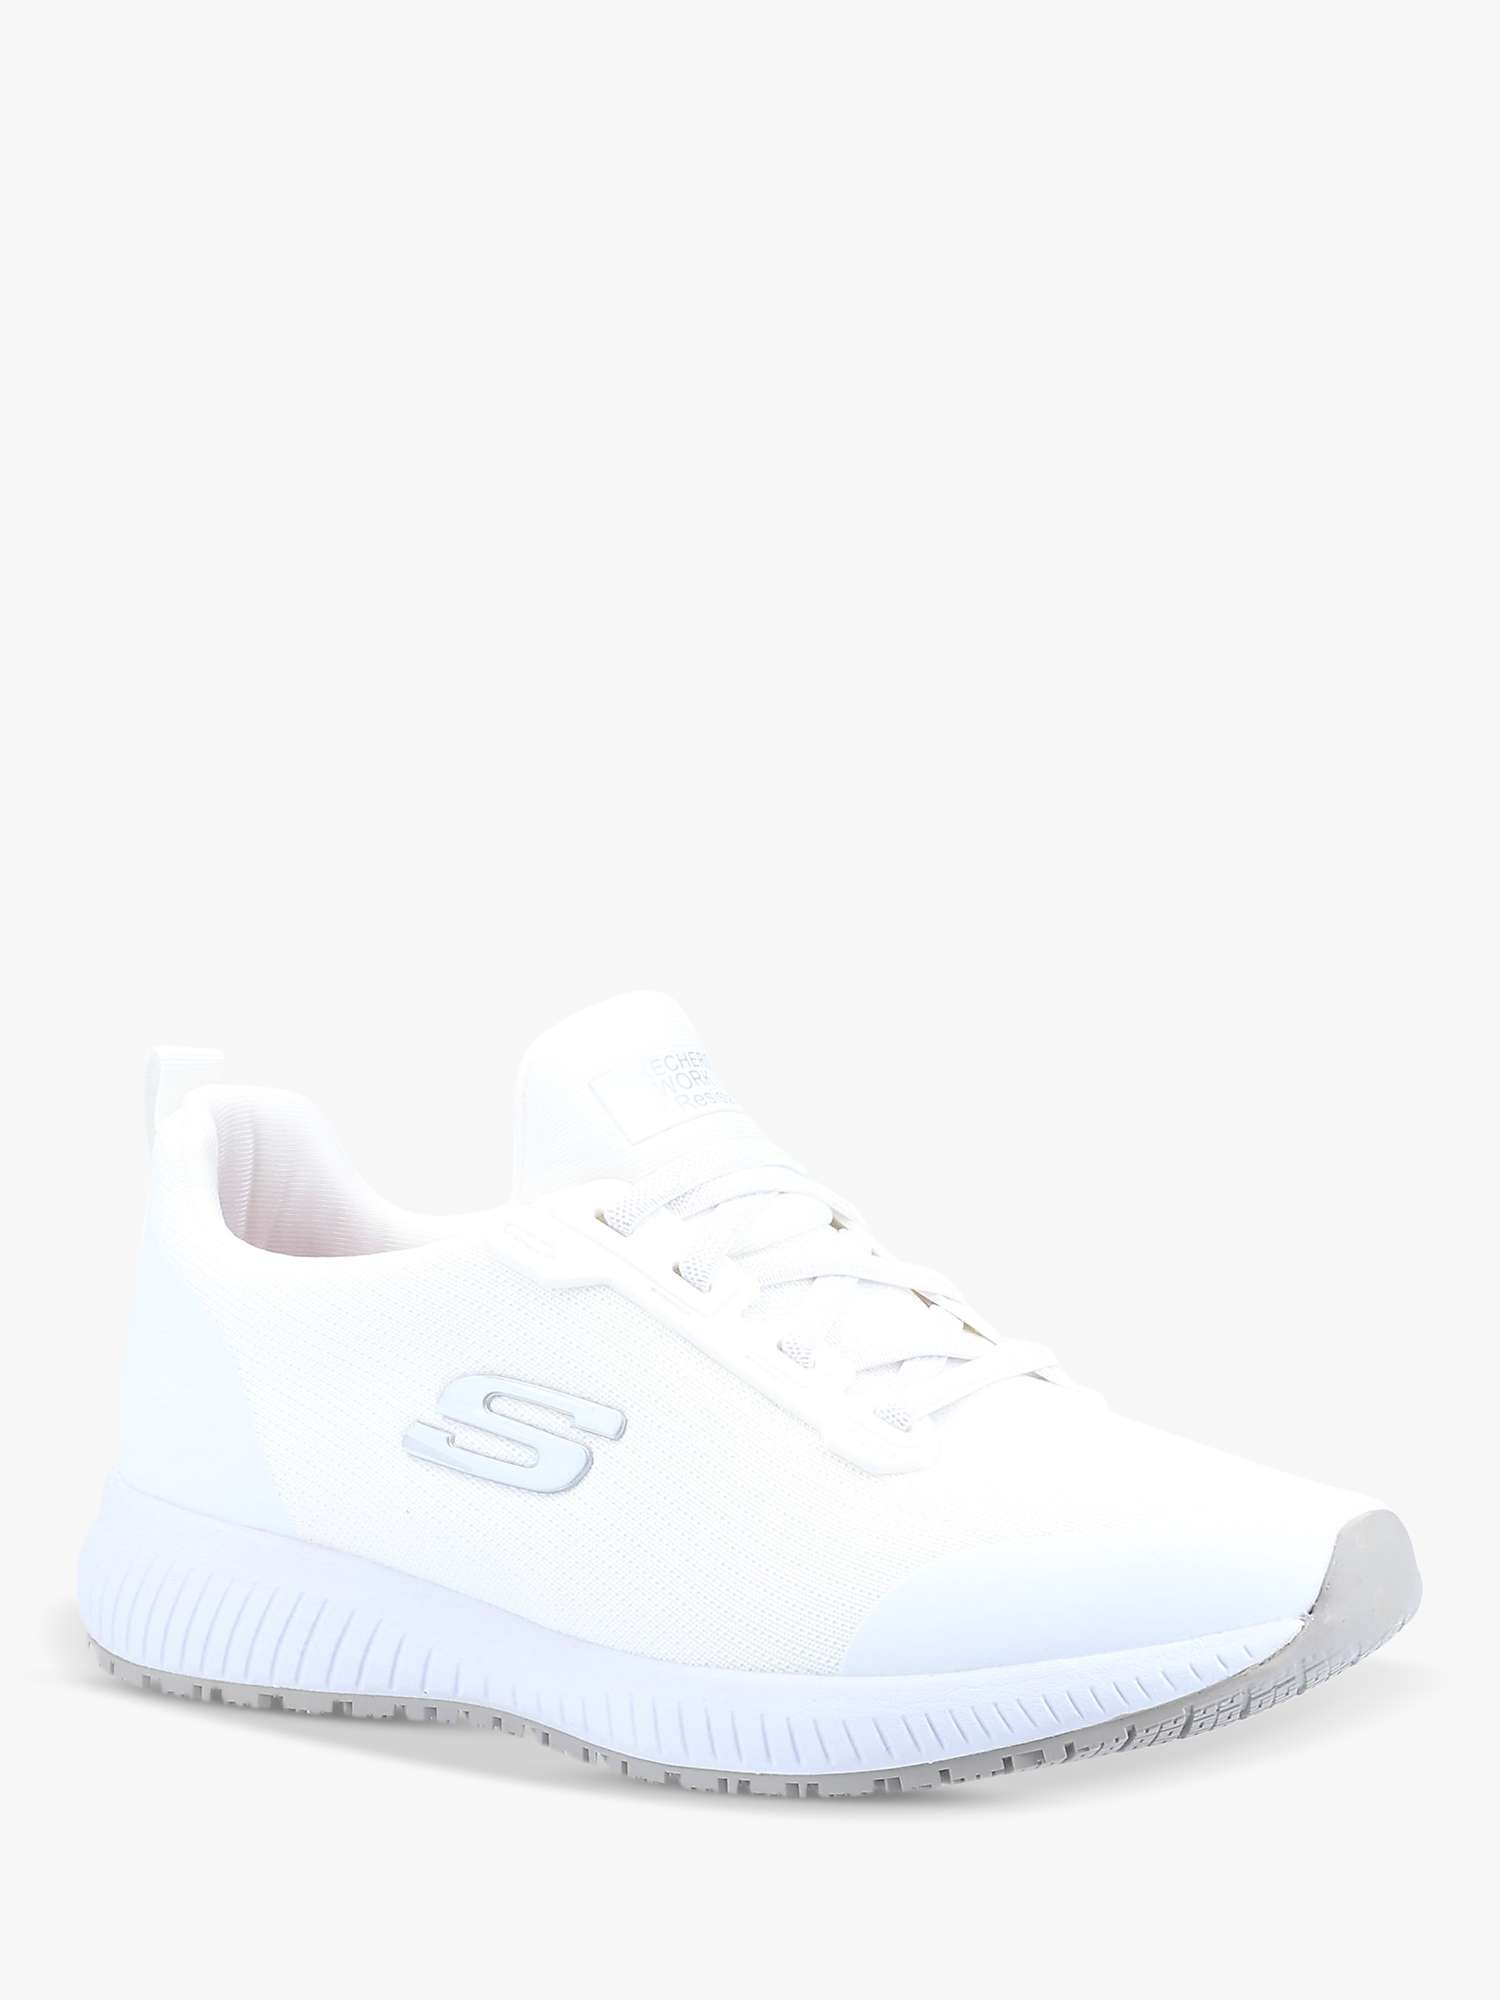 Buy Skechers Squad SR Lace Up Trainers Online at johnlewis.com